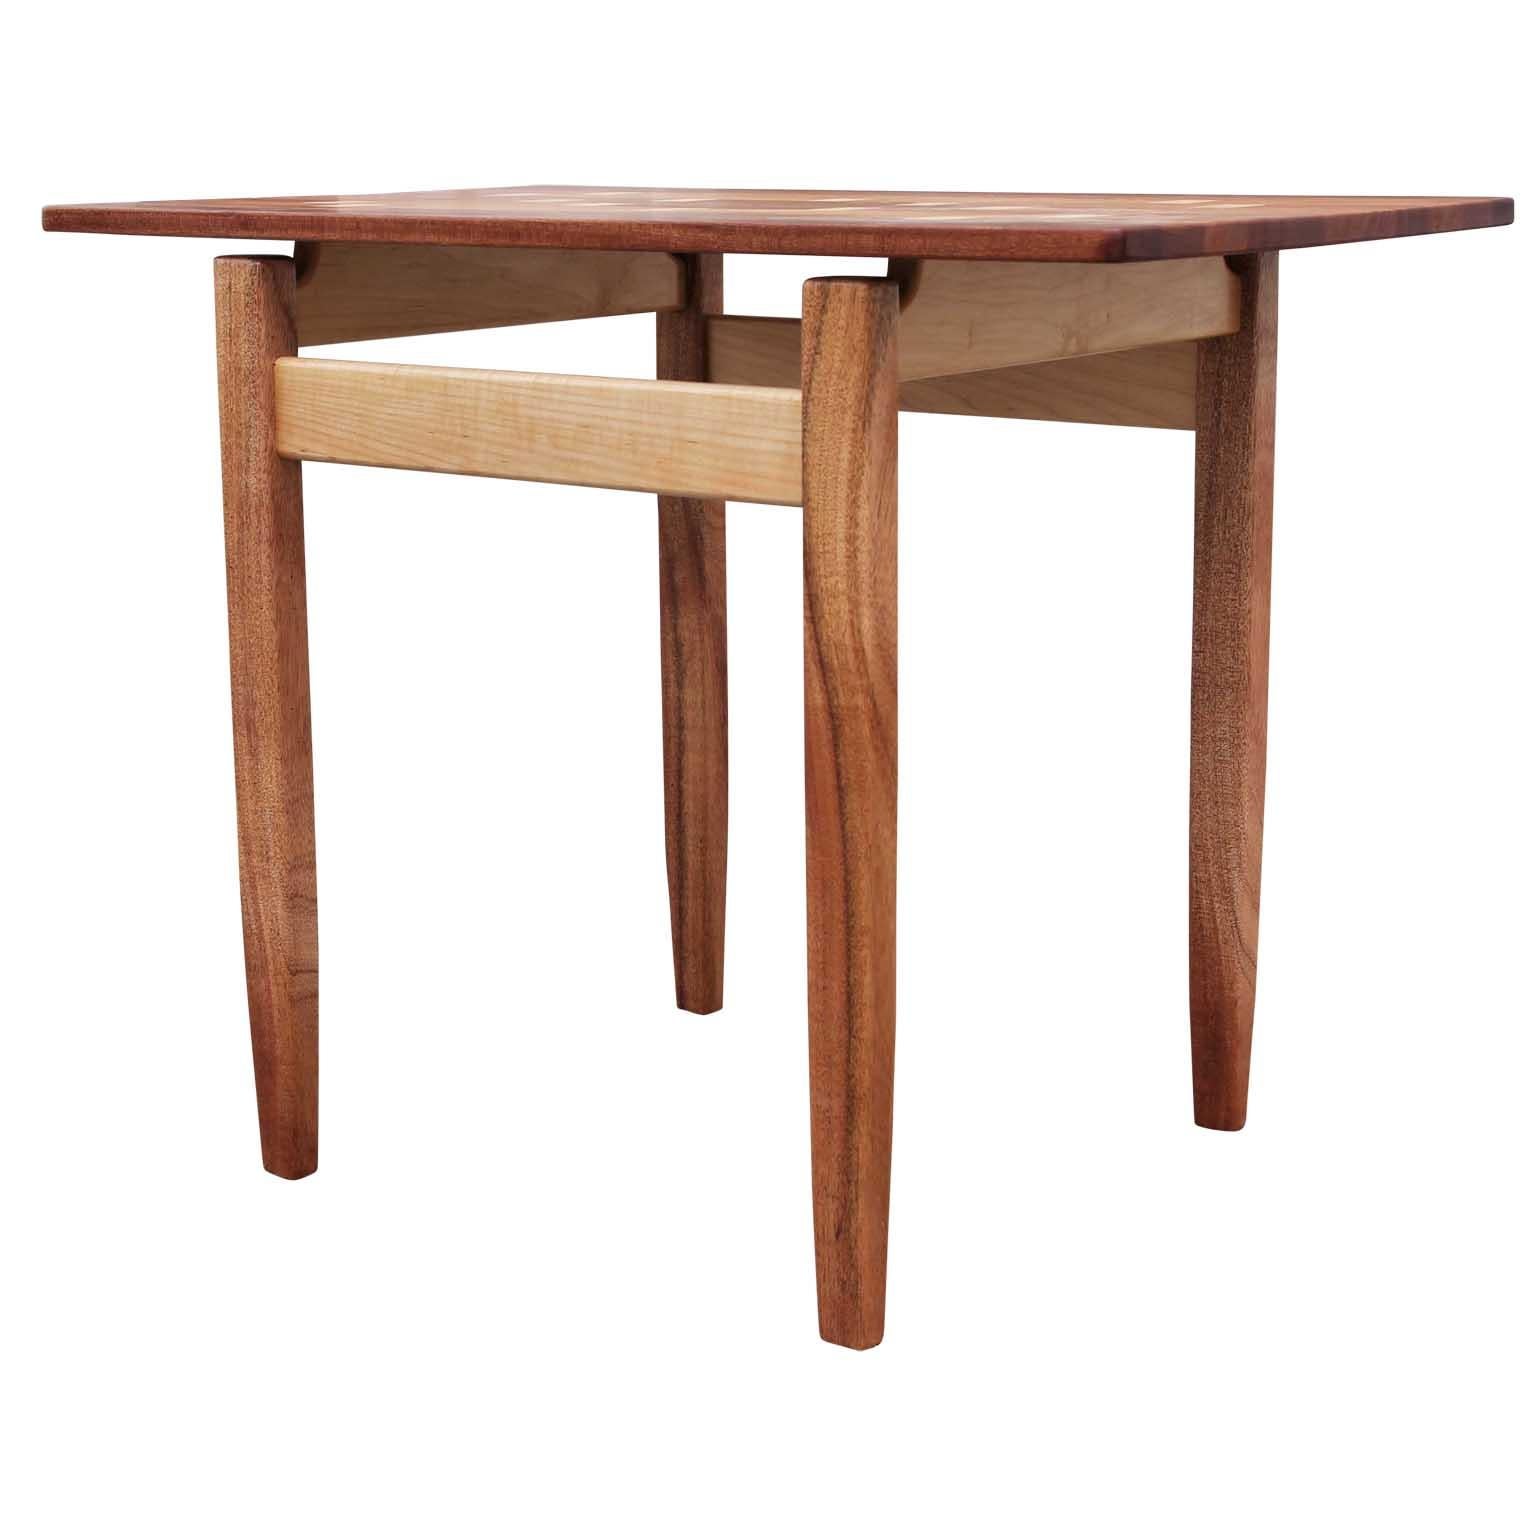 American Modern Custom Norm Stoeker Mahogany and Maple Wood inlaid Rectangle Side Table